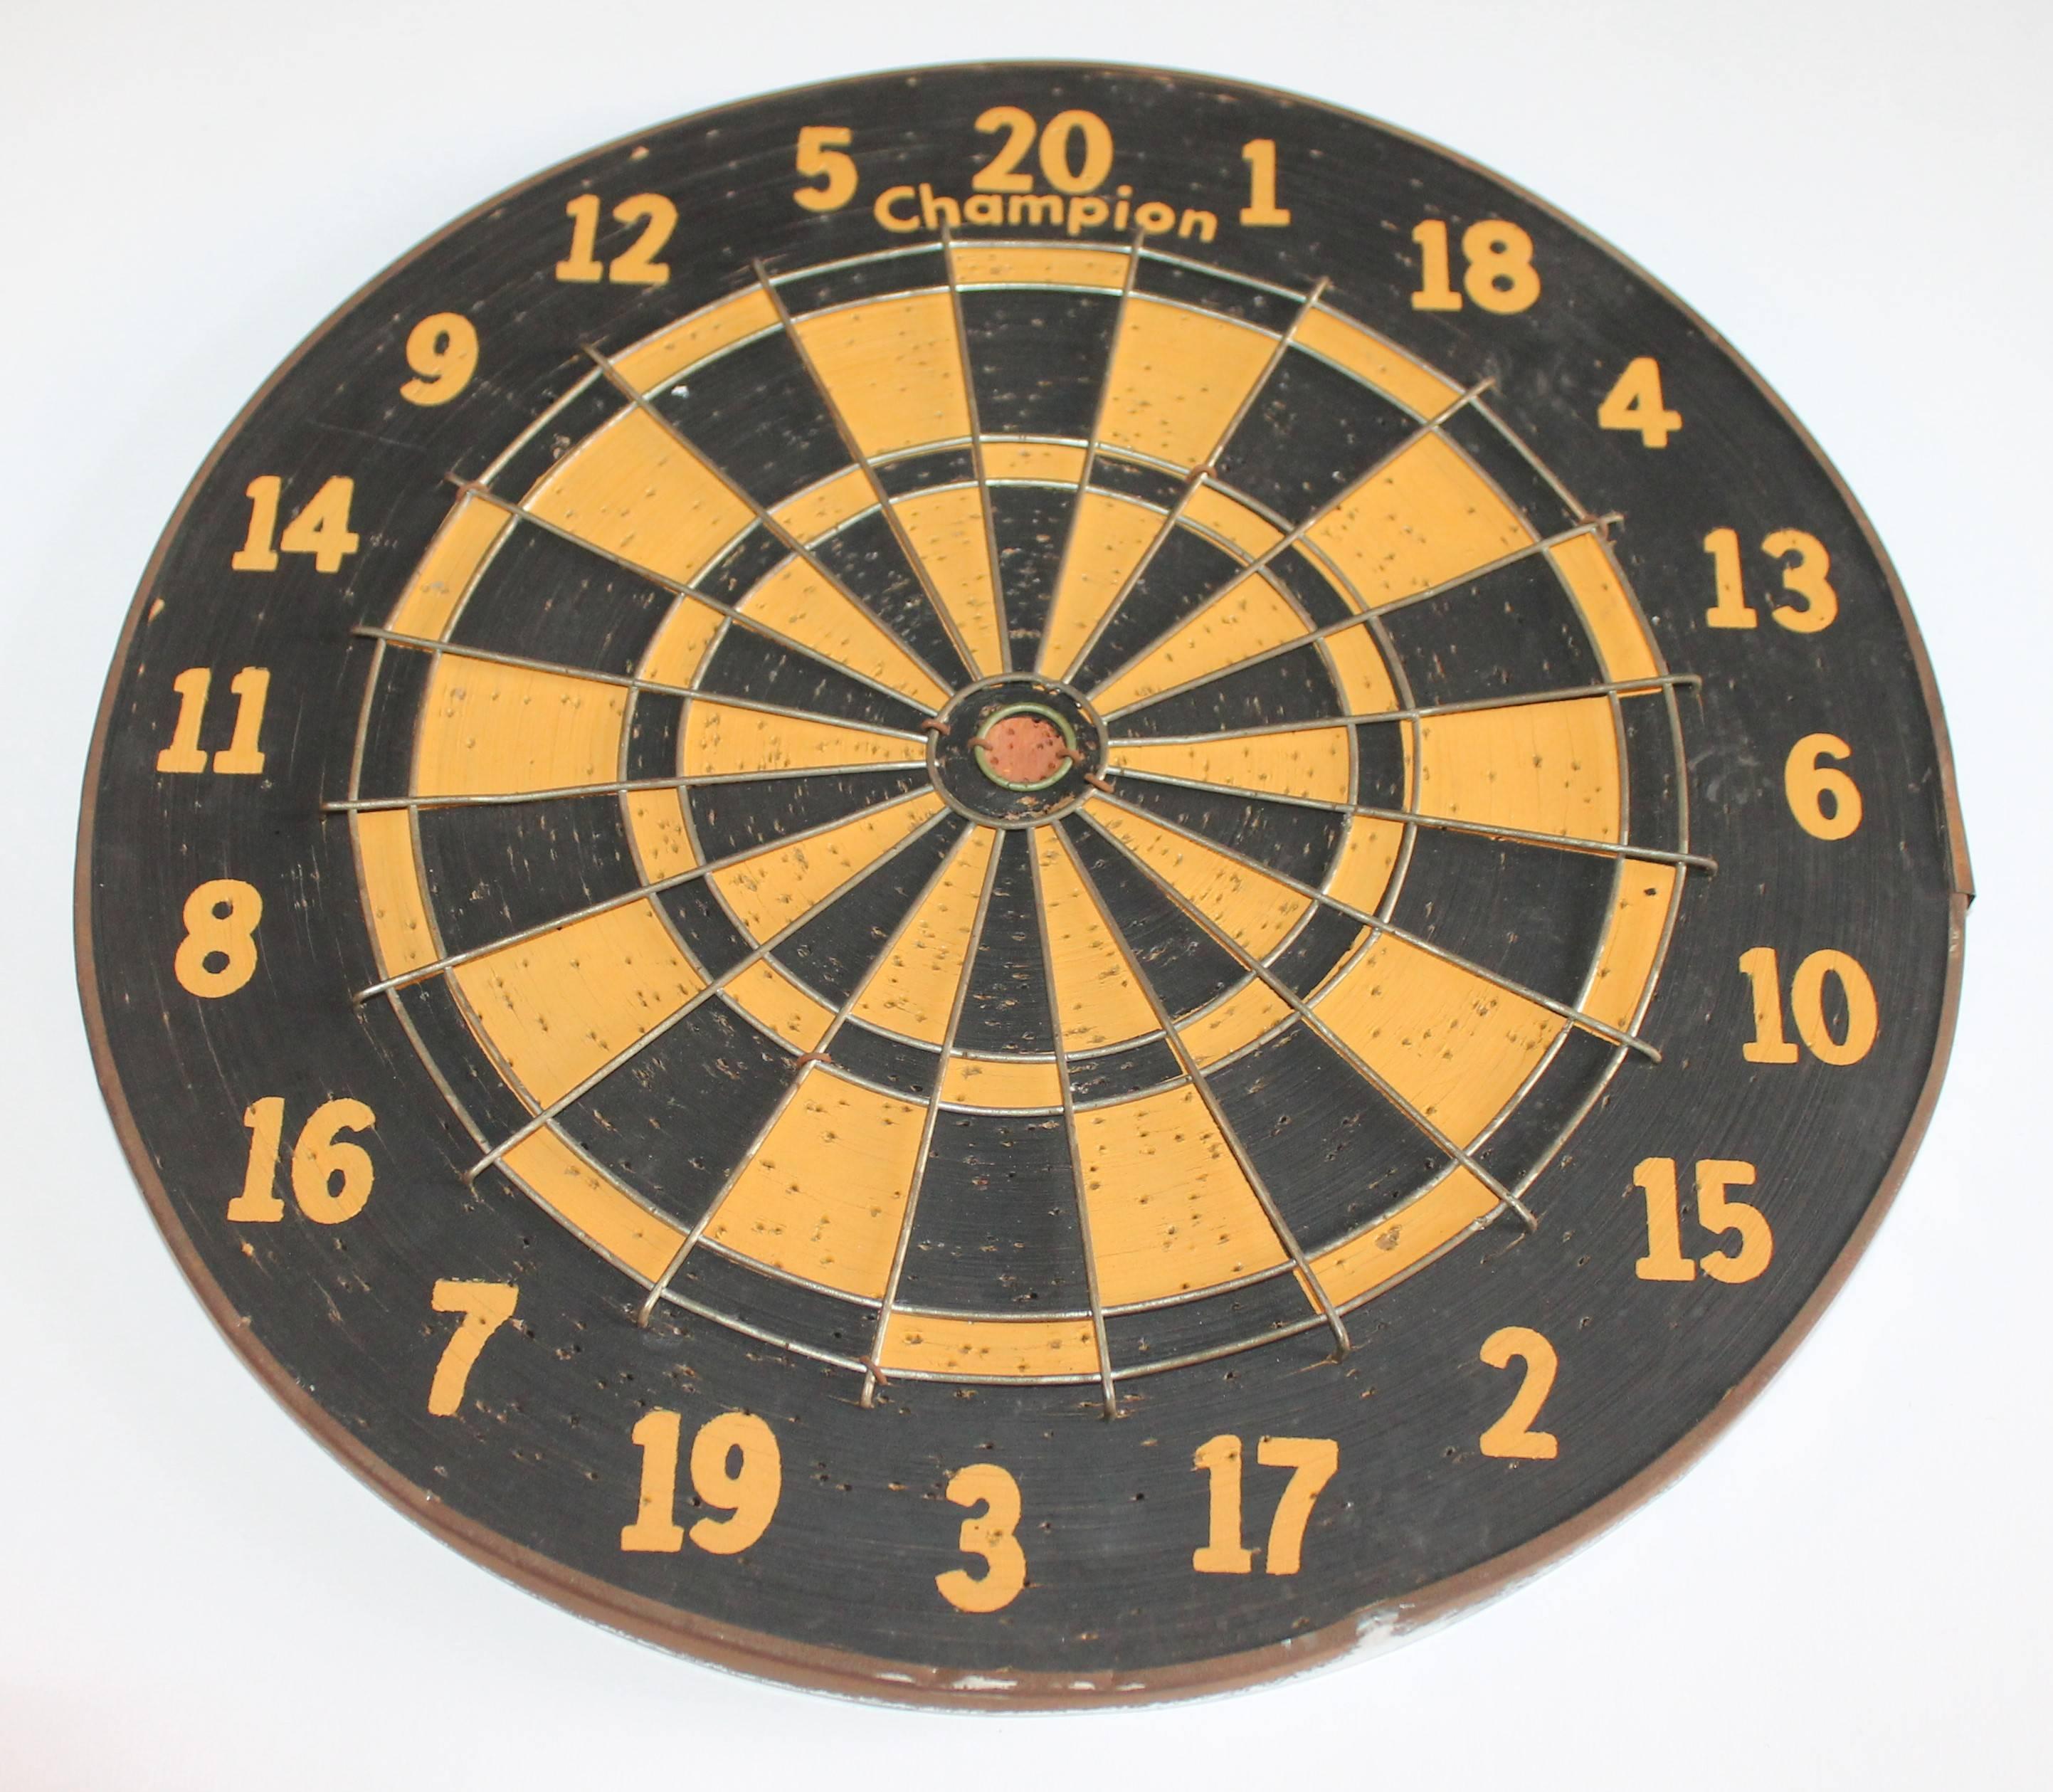 This funky dart target board is double sided and has baseball game on one side and regular target with points on the other side. The trim is the original tin binding or border. The condition is very good. Usually found in bars or pubs. It is all